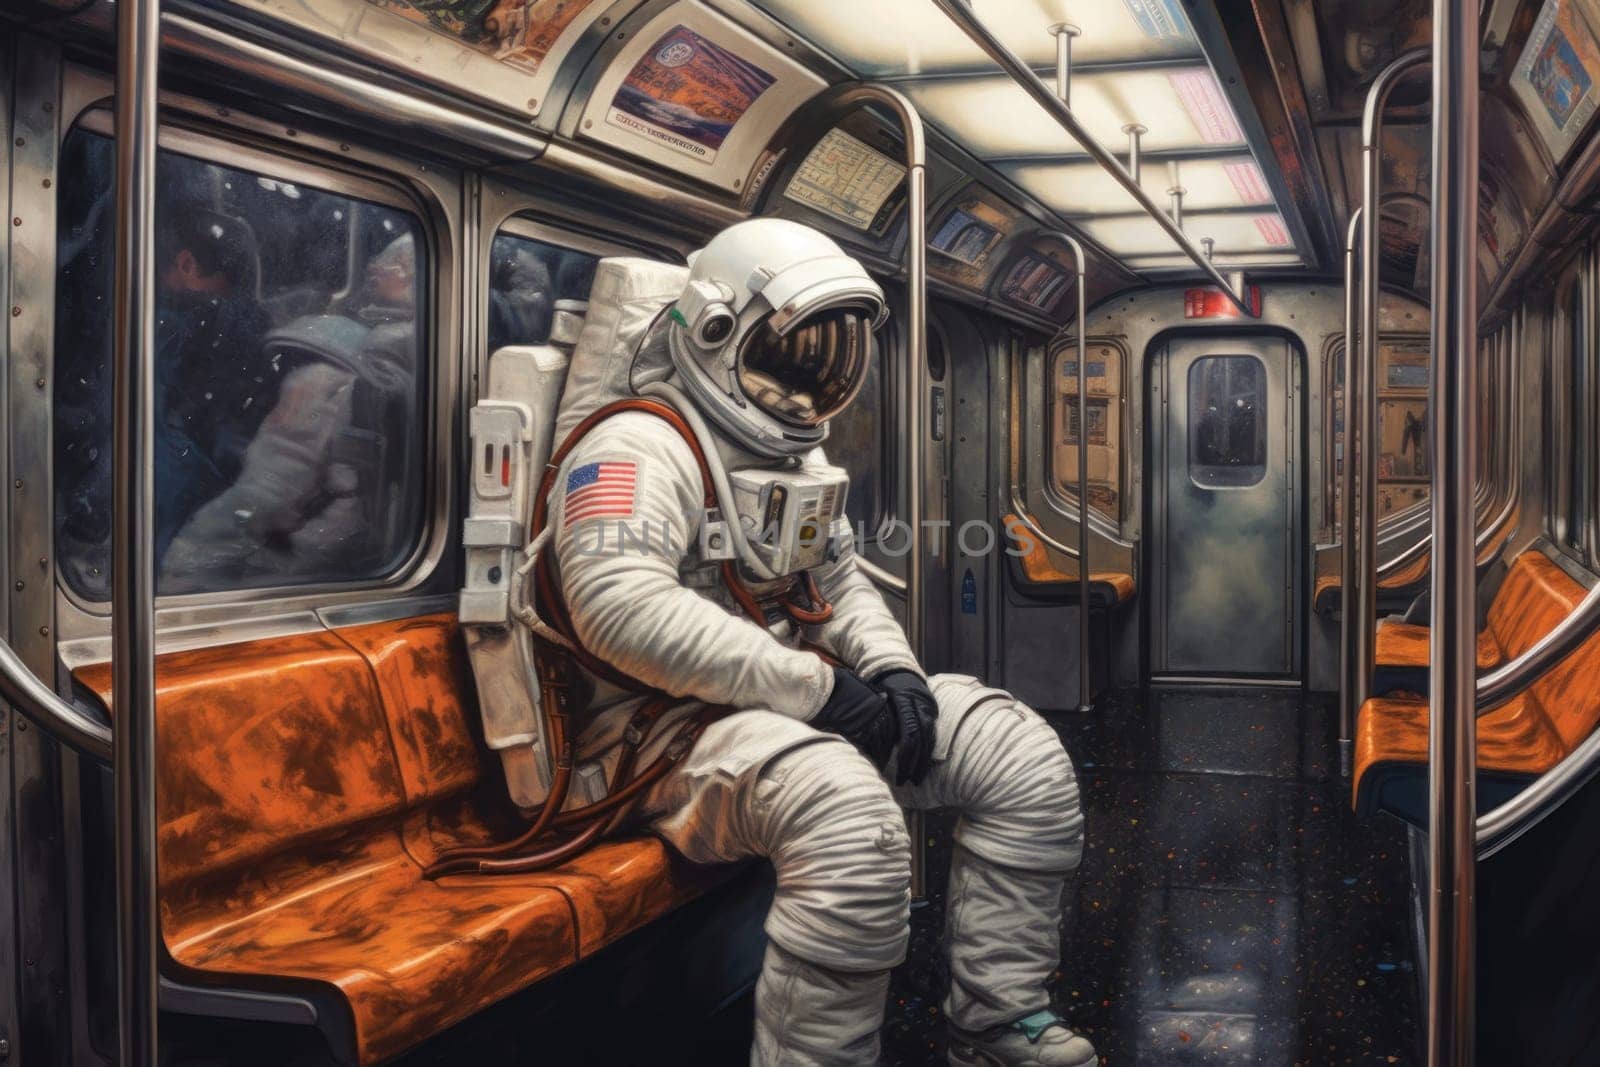 An astronaut in the subway. Astronaut in the urban environment.